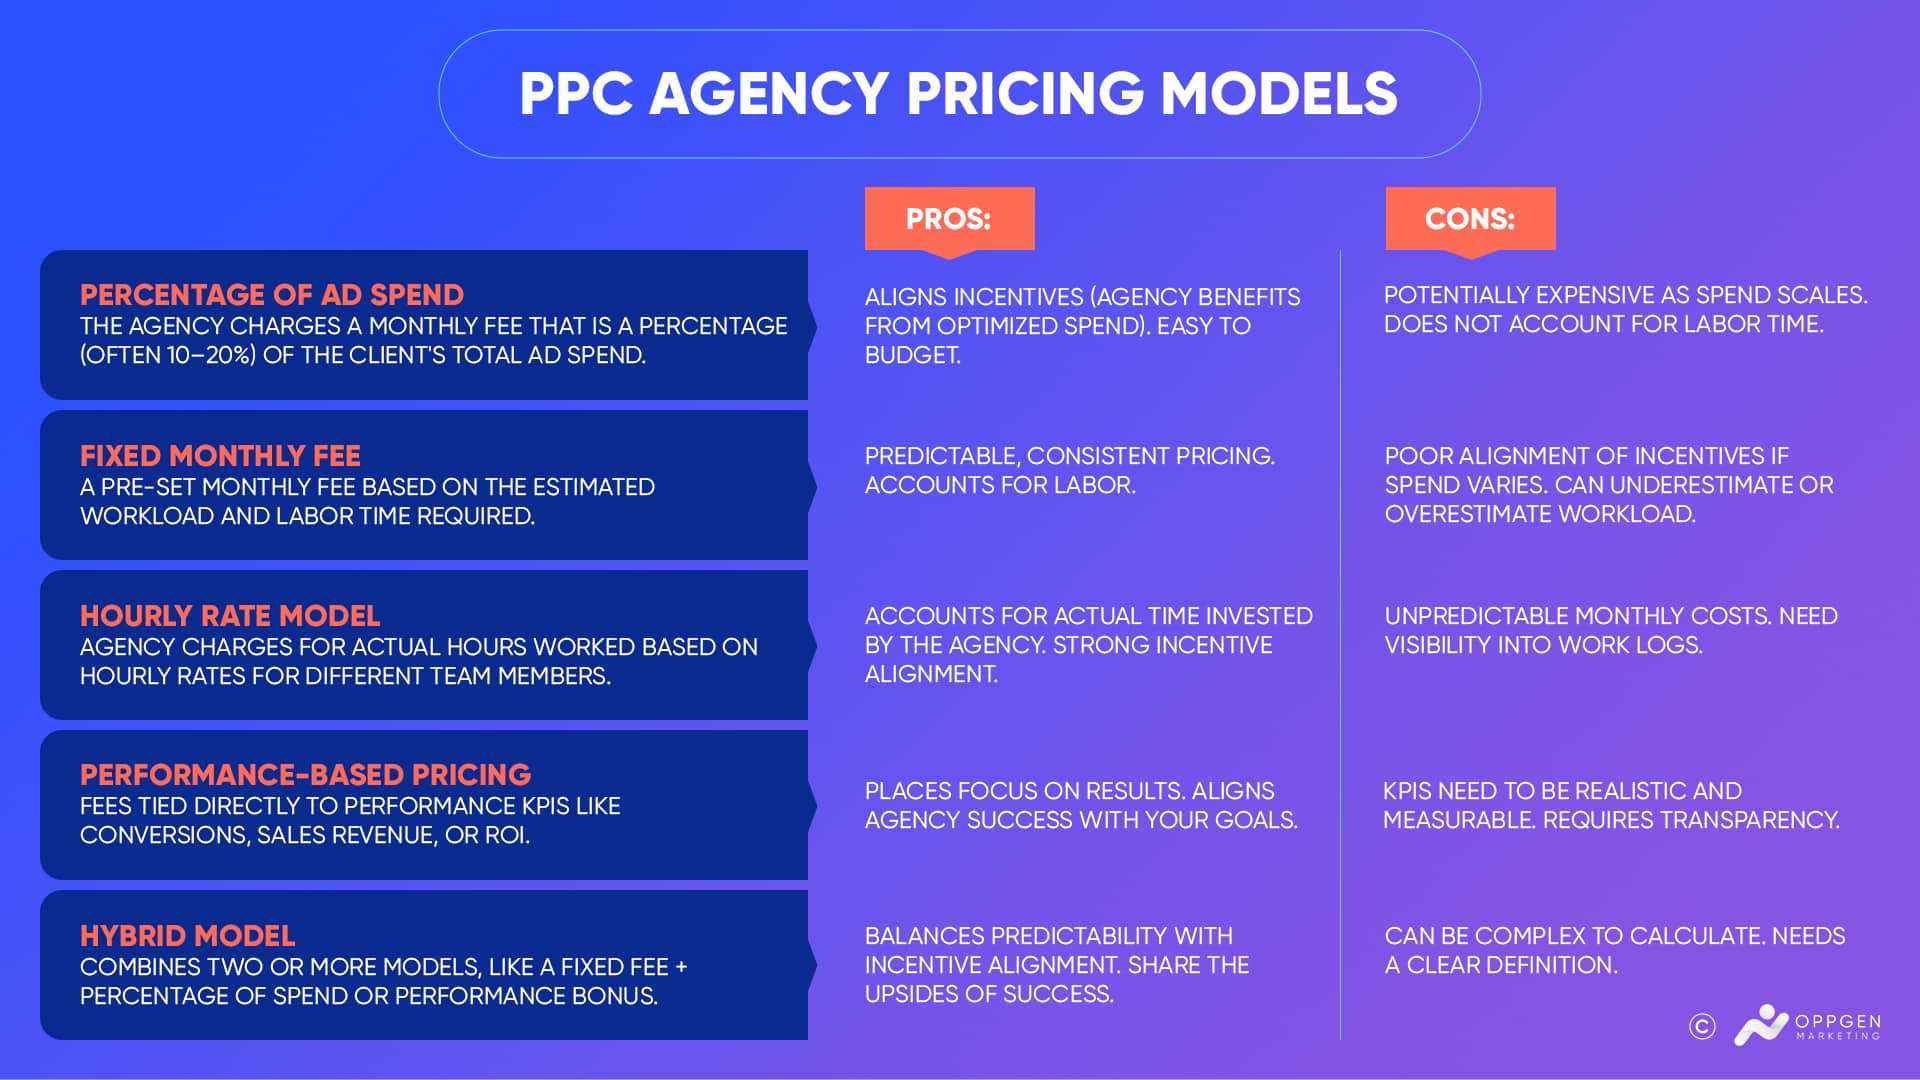 Different pricing models, their pros and cons.